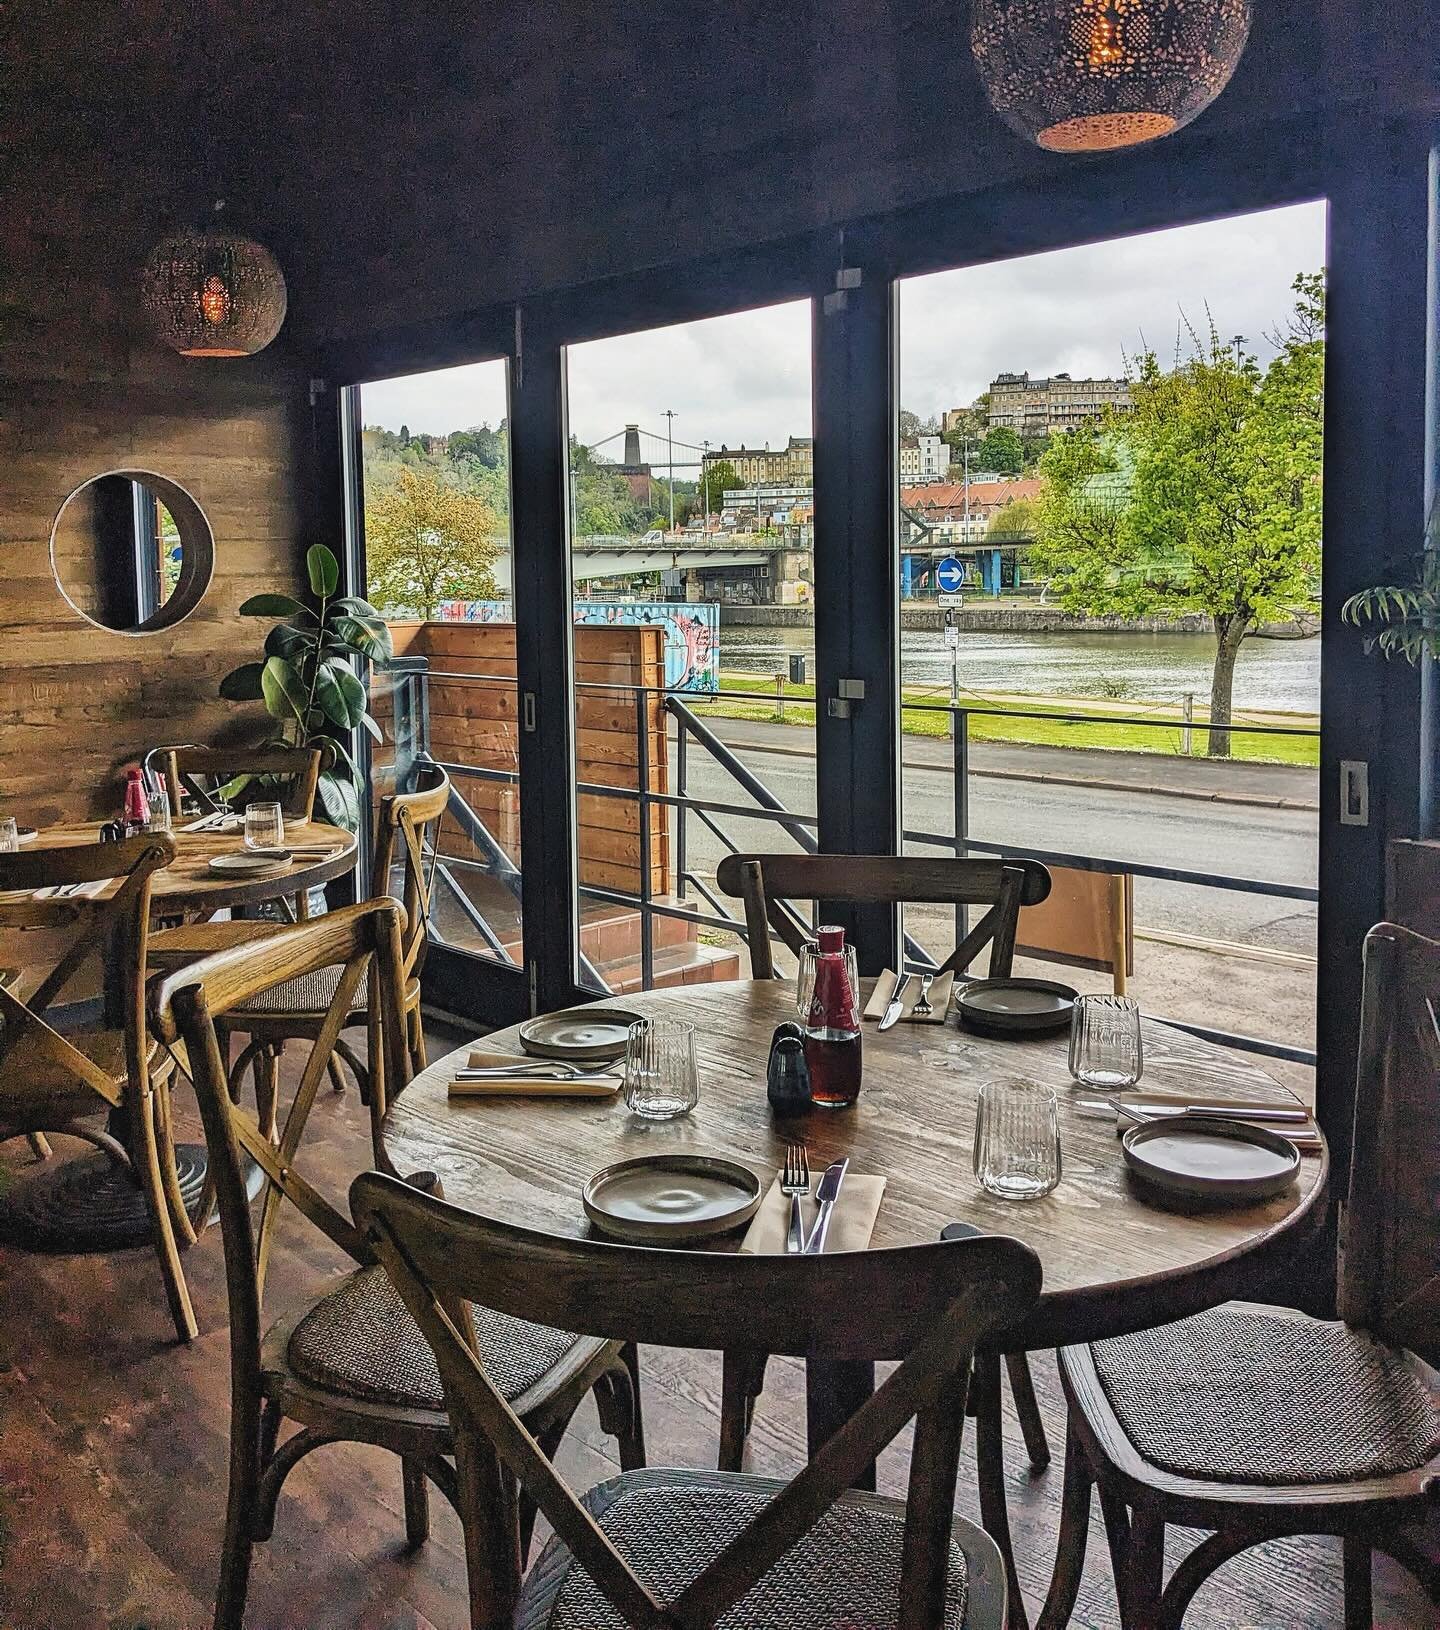 Enjoy seafood with a view come rain or shine! 🌊

There are TWO bank holidays in the mix for May, the first of which is *this* week - we&rsquo;ll be open as usual over the long weekends (closed on Mondays). 

We&rsquo;d recommend booking ahead to sec